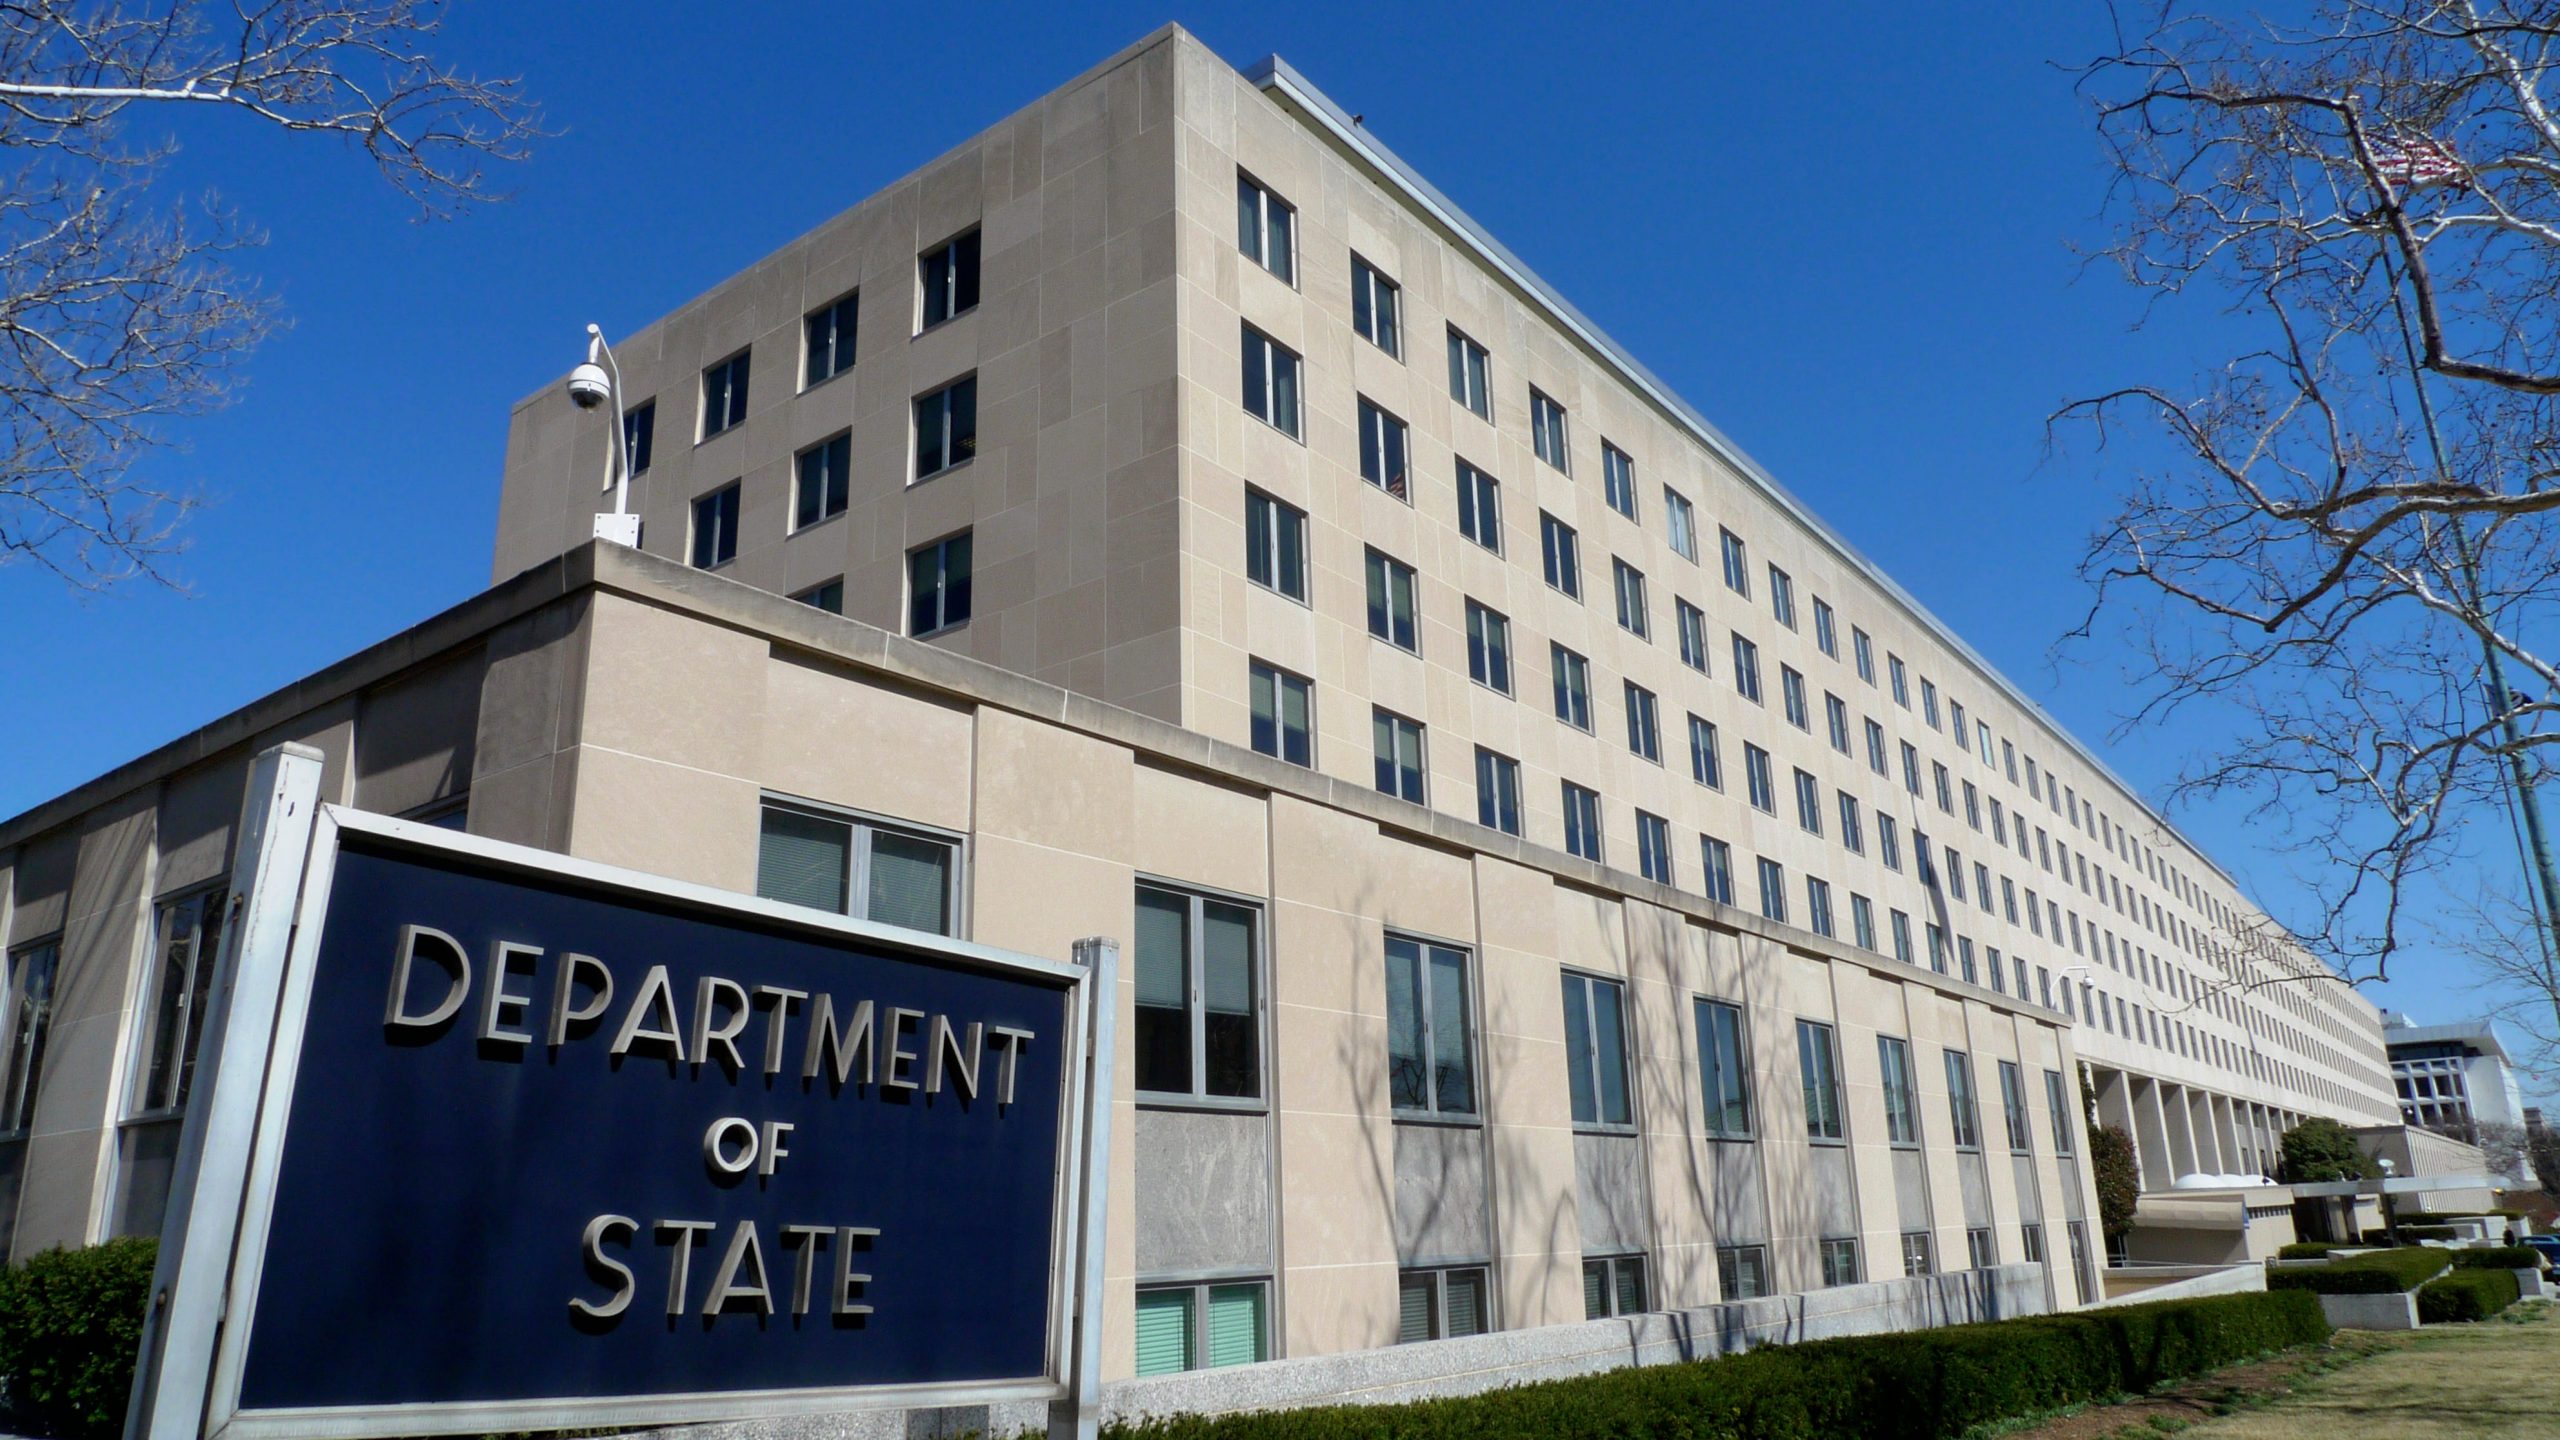 The US Department of State building in Washington DC.